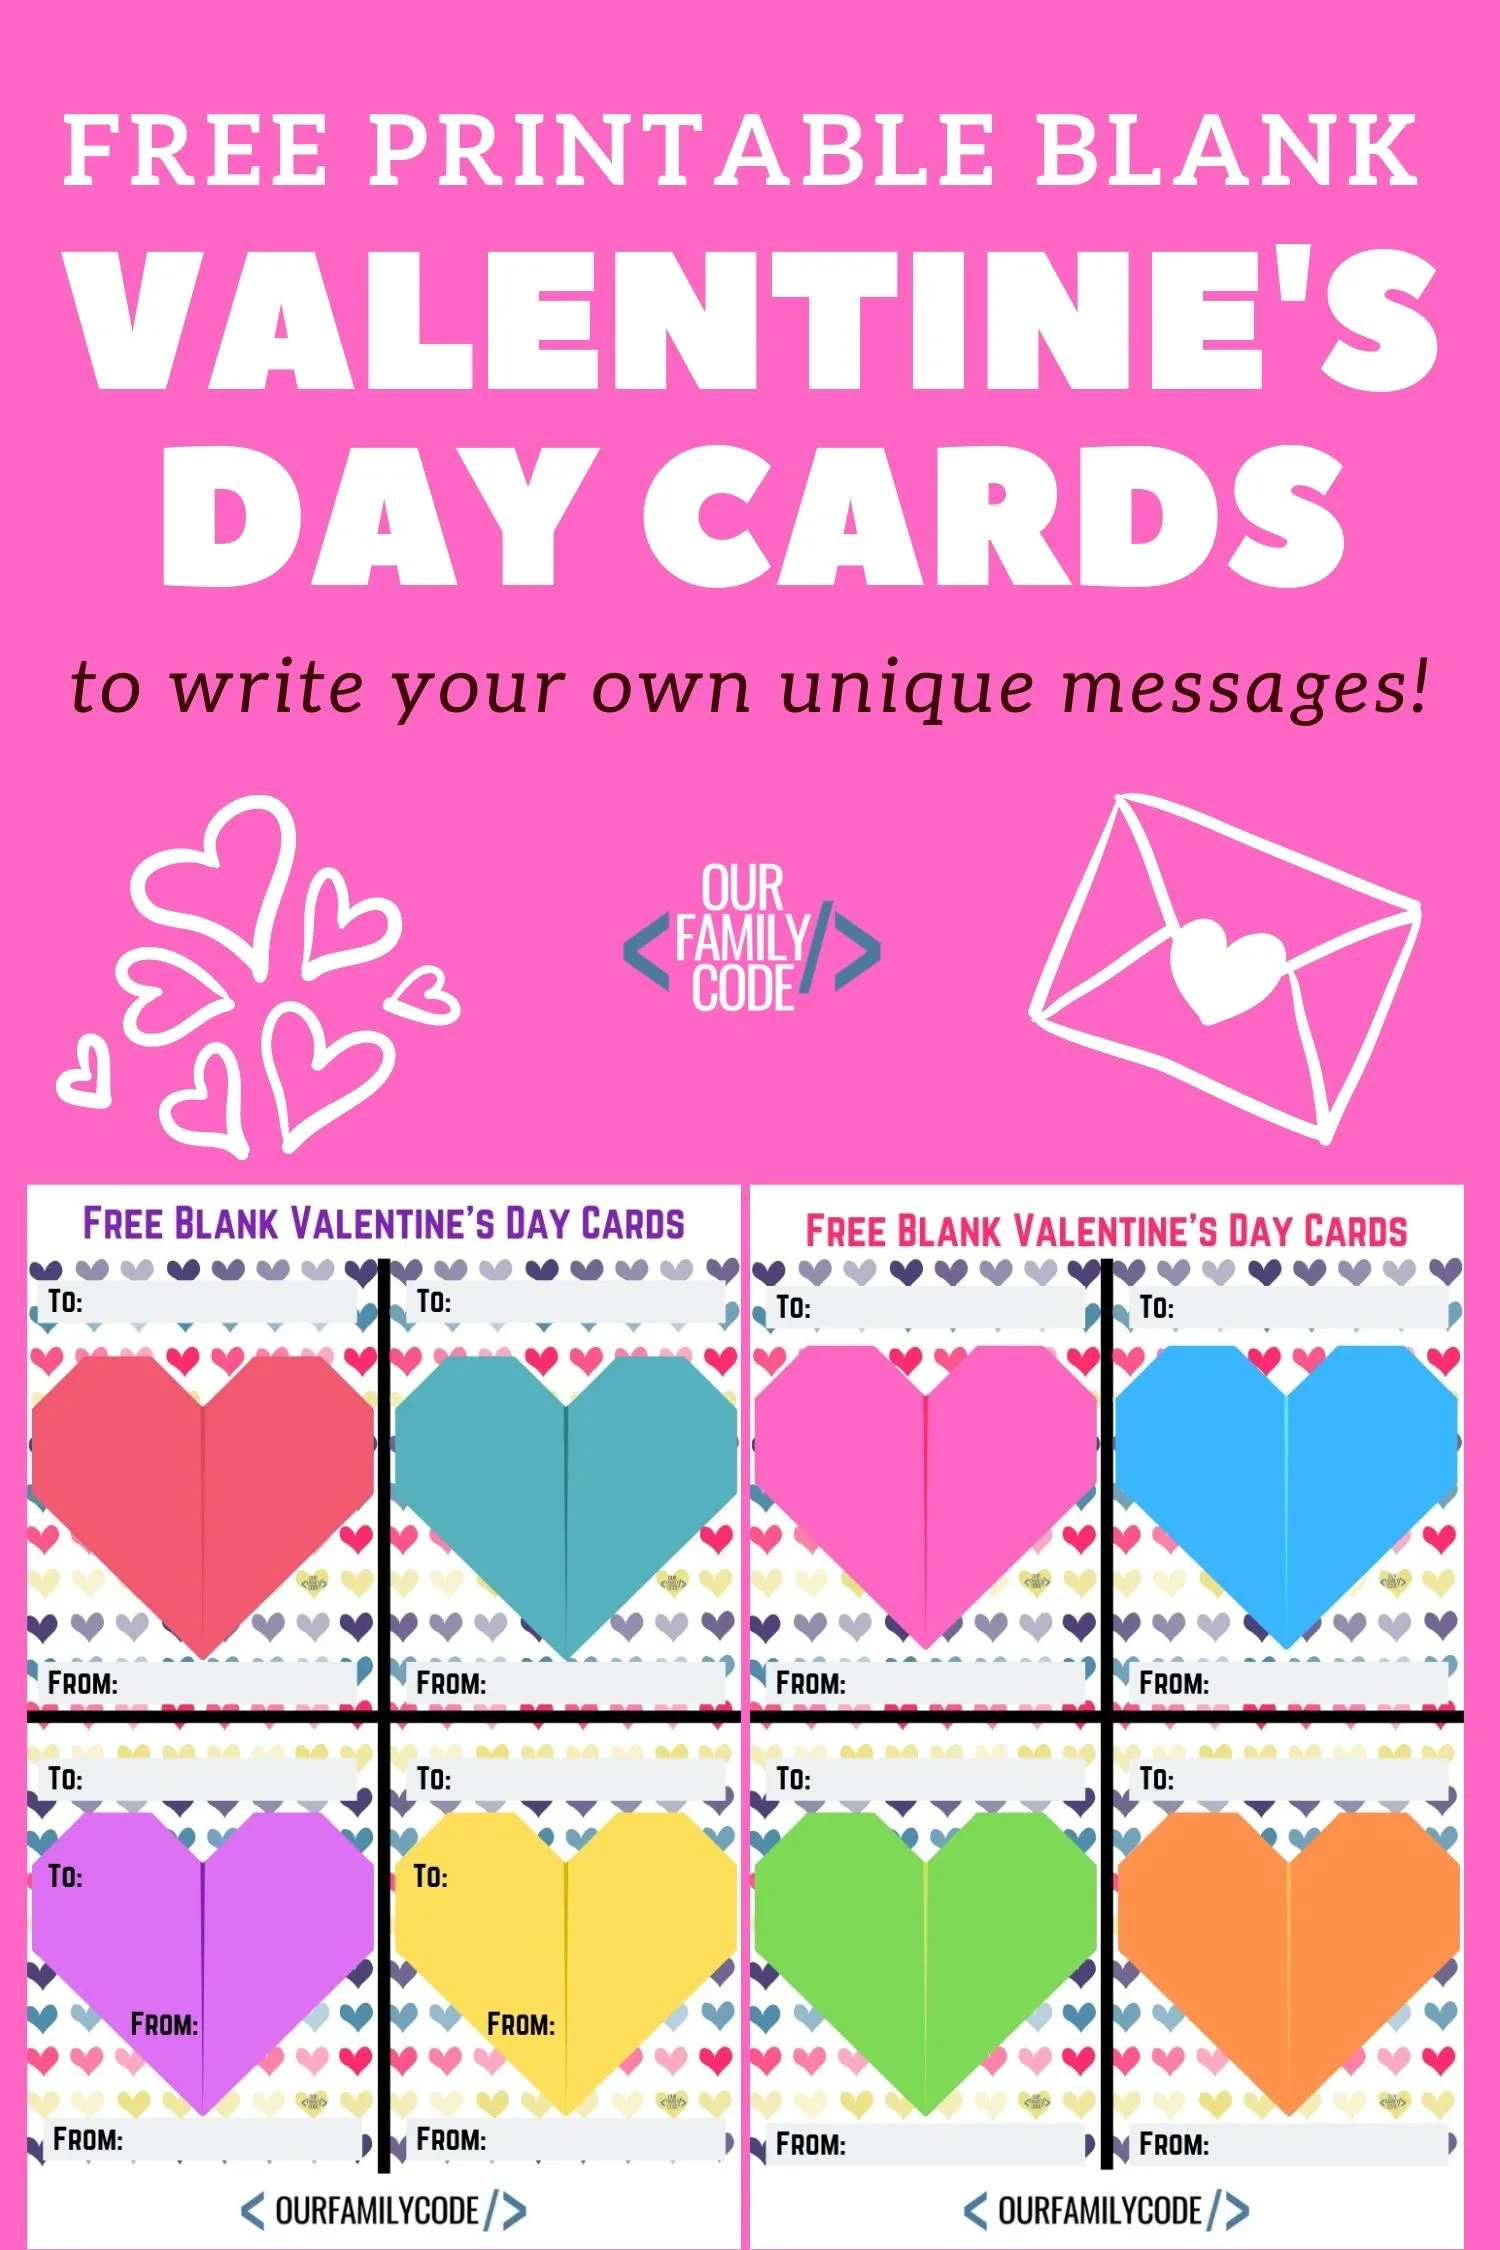 Grab these free printable blank Valentine's Day cards just in time for the Valentine's Day card exchange at school! These cards are perfect for writing your own special messages on! #ValentinesDay #Valentines #kidcrafts